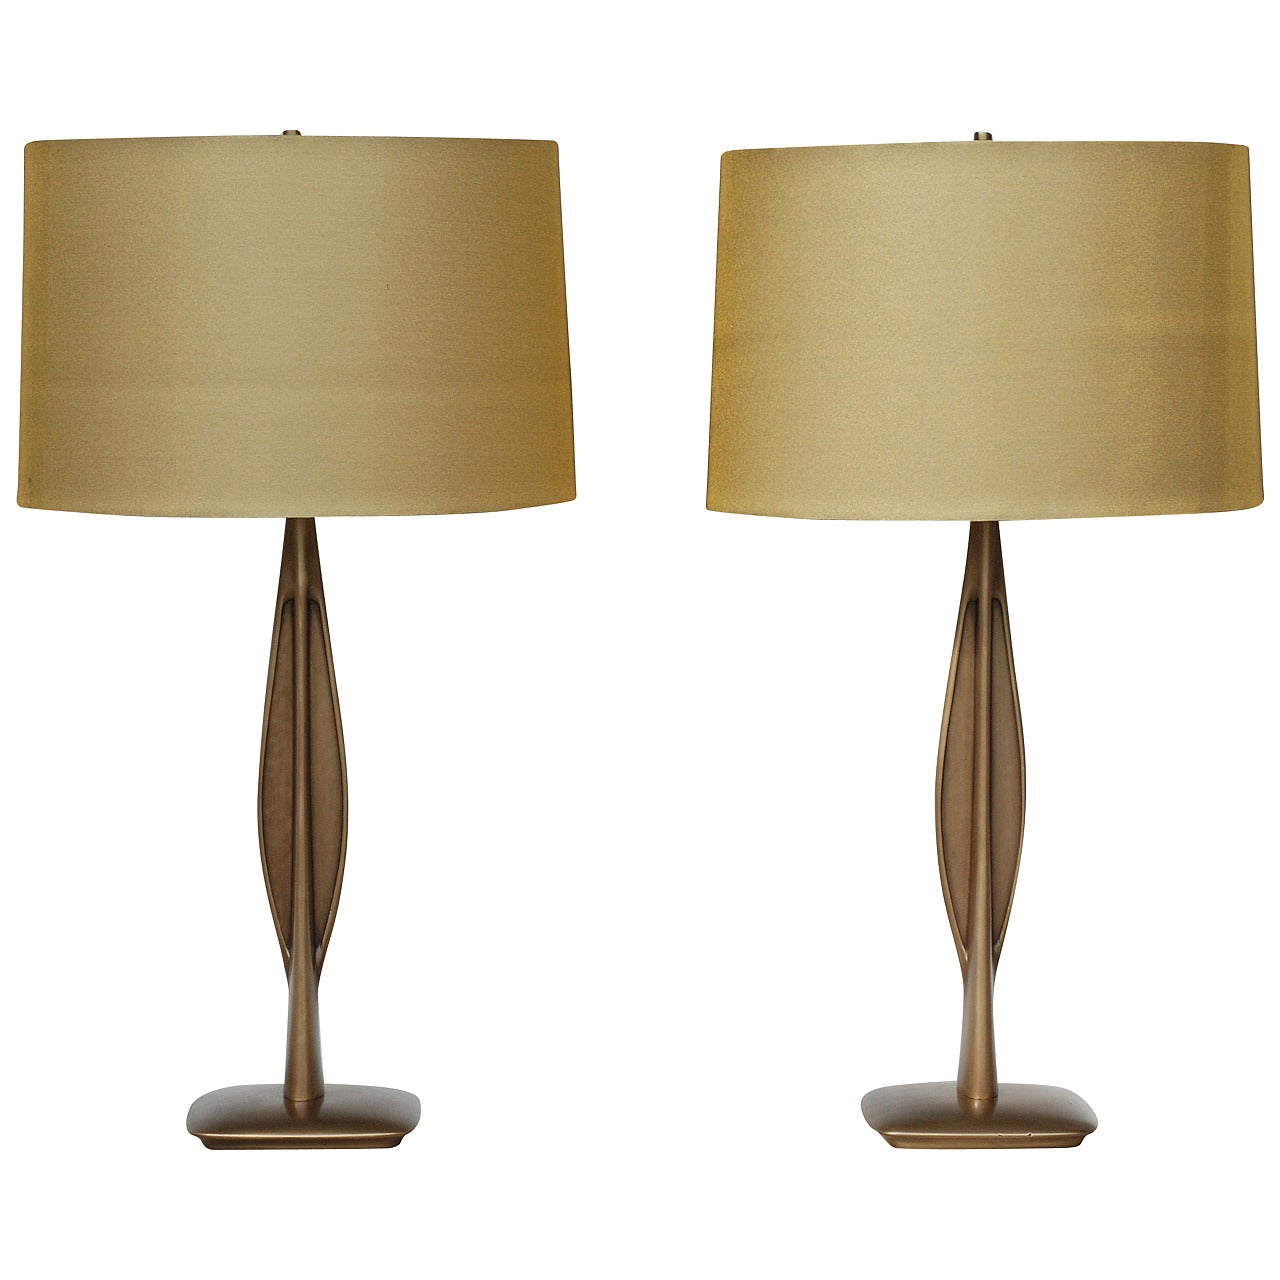 Pair of Laurel Table Lamps in Burnished Brass